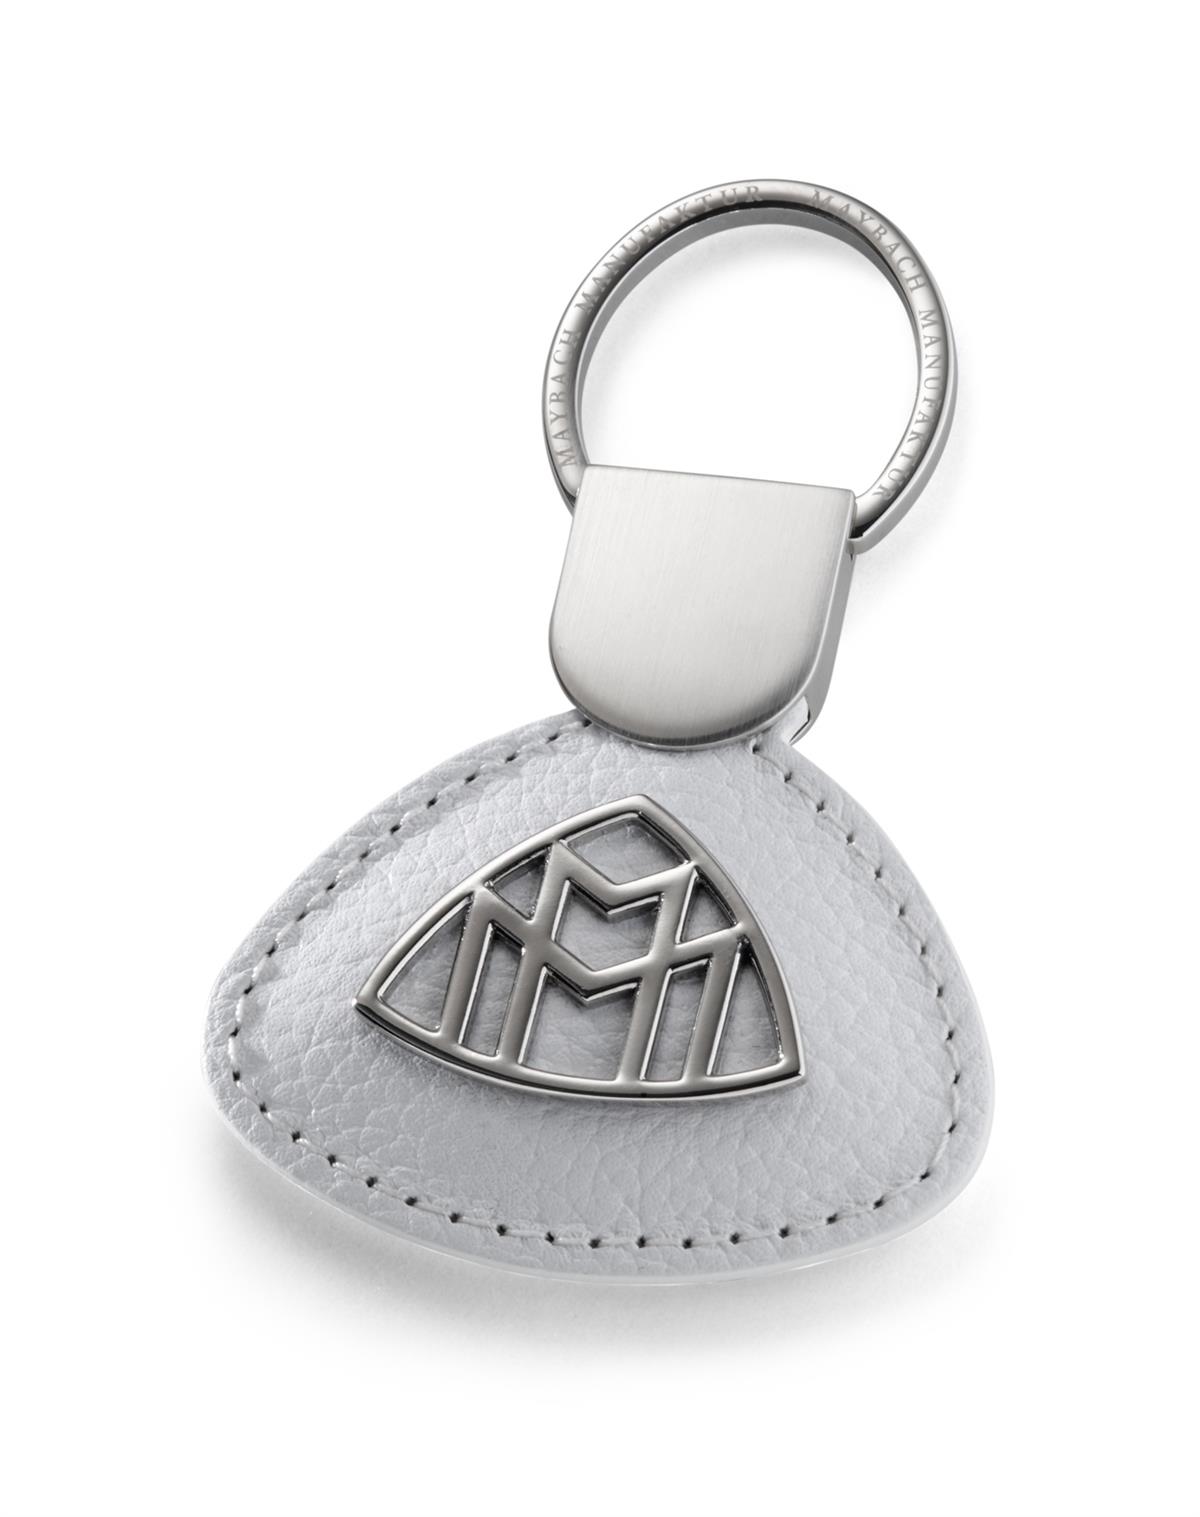 OPTIC HOUSE_MAYBACH Boutique 77 THE RELEASE I Keyring white